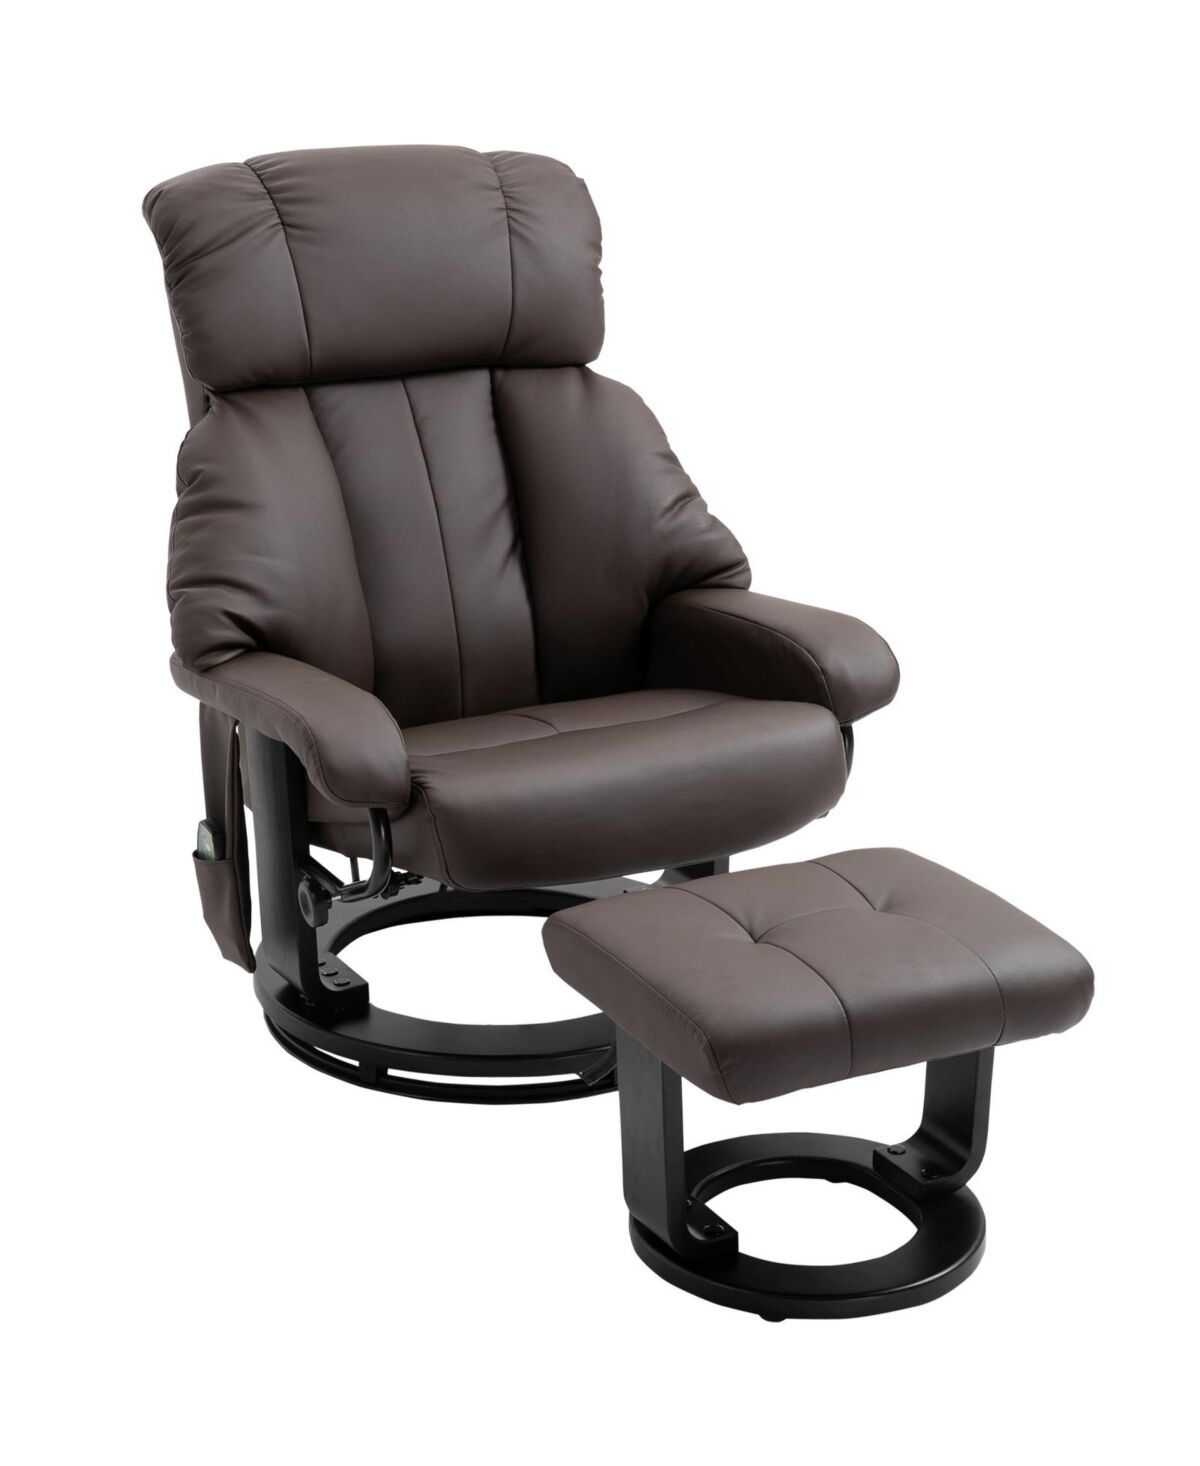 Homcom Massage Recliner Chair with Cushioned Ottoman and 10 Point Vibration - Brown